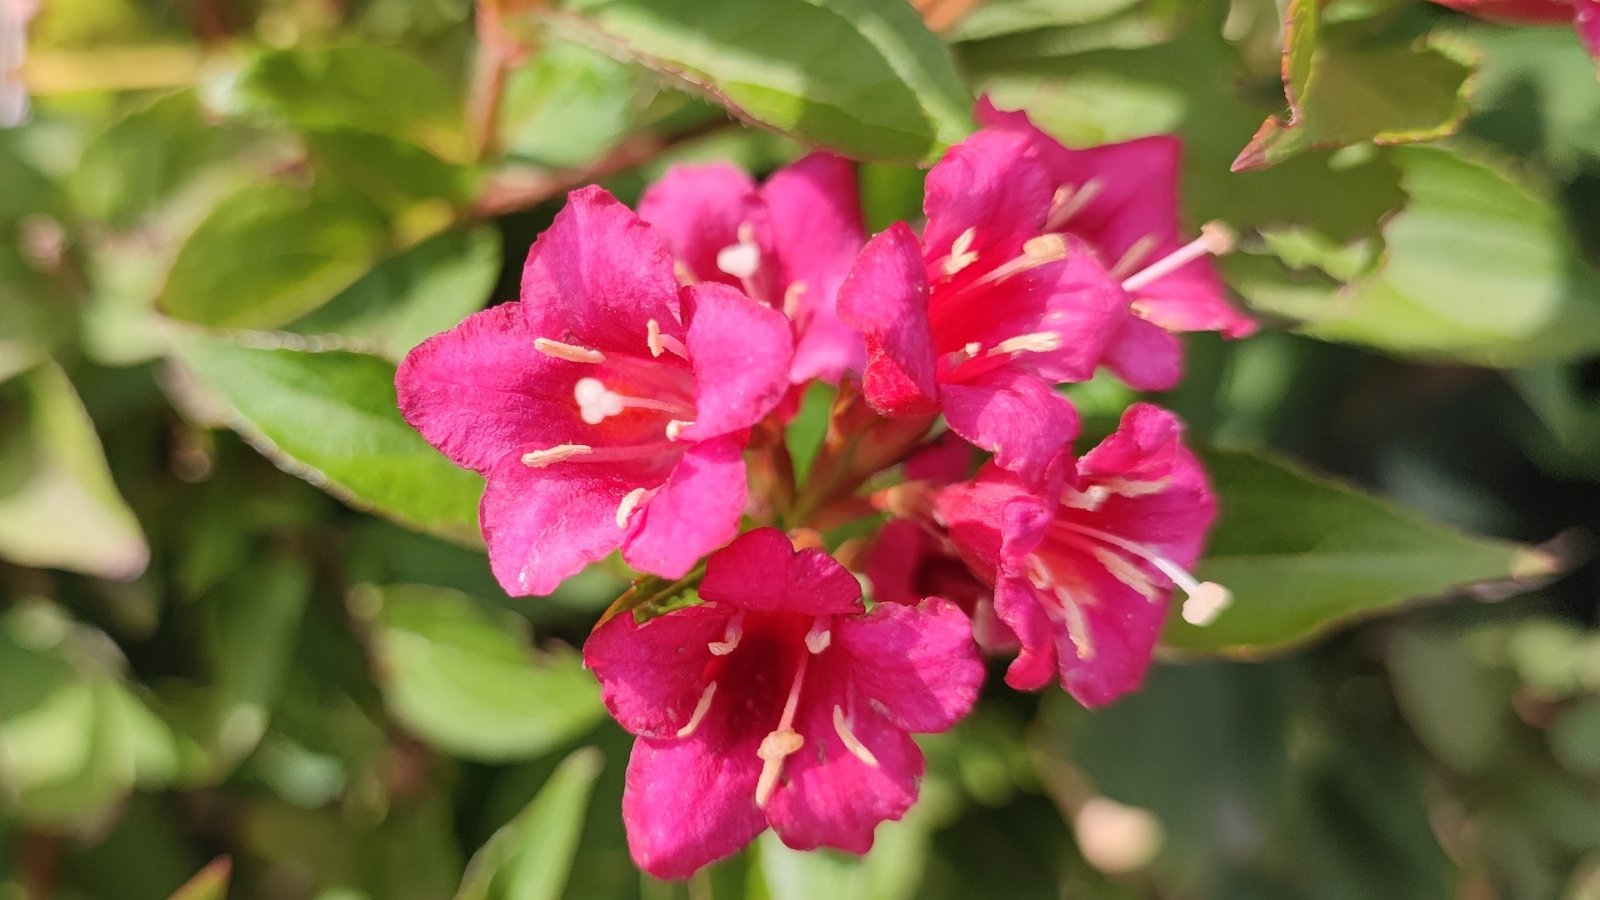 A close-up of vibrant pink ‘Sonic Bloom Wine' weigela flowers illuminated by sunlight, with blurred leaves in the background, showcasing nature's delicate beauty in full bloom.